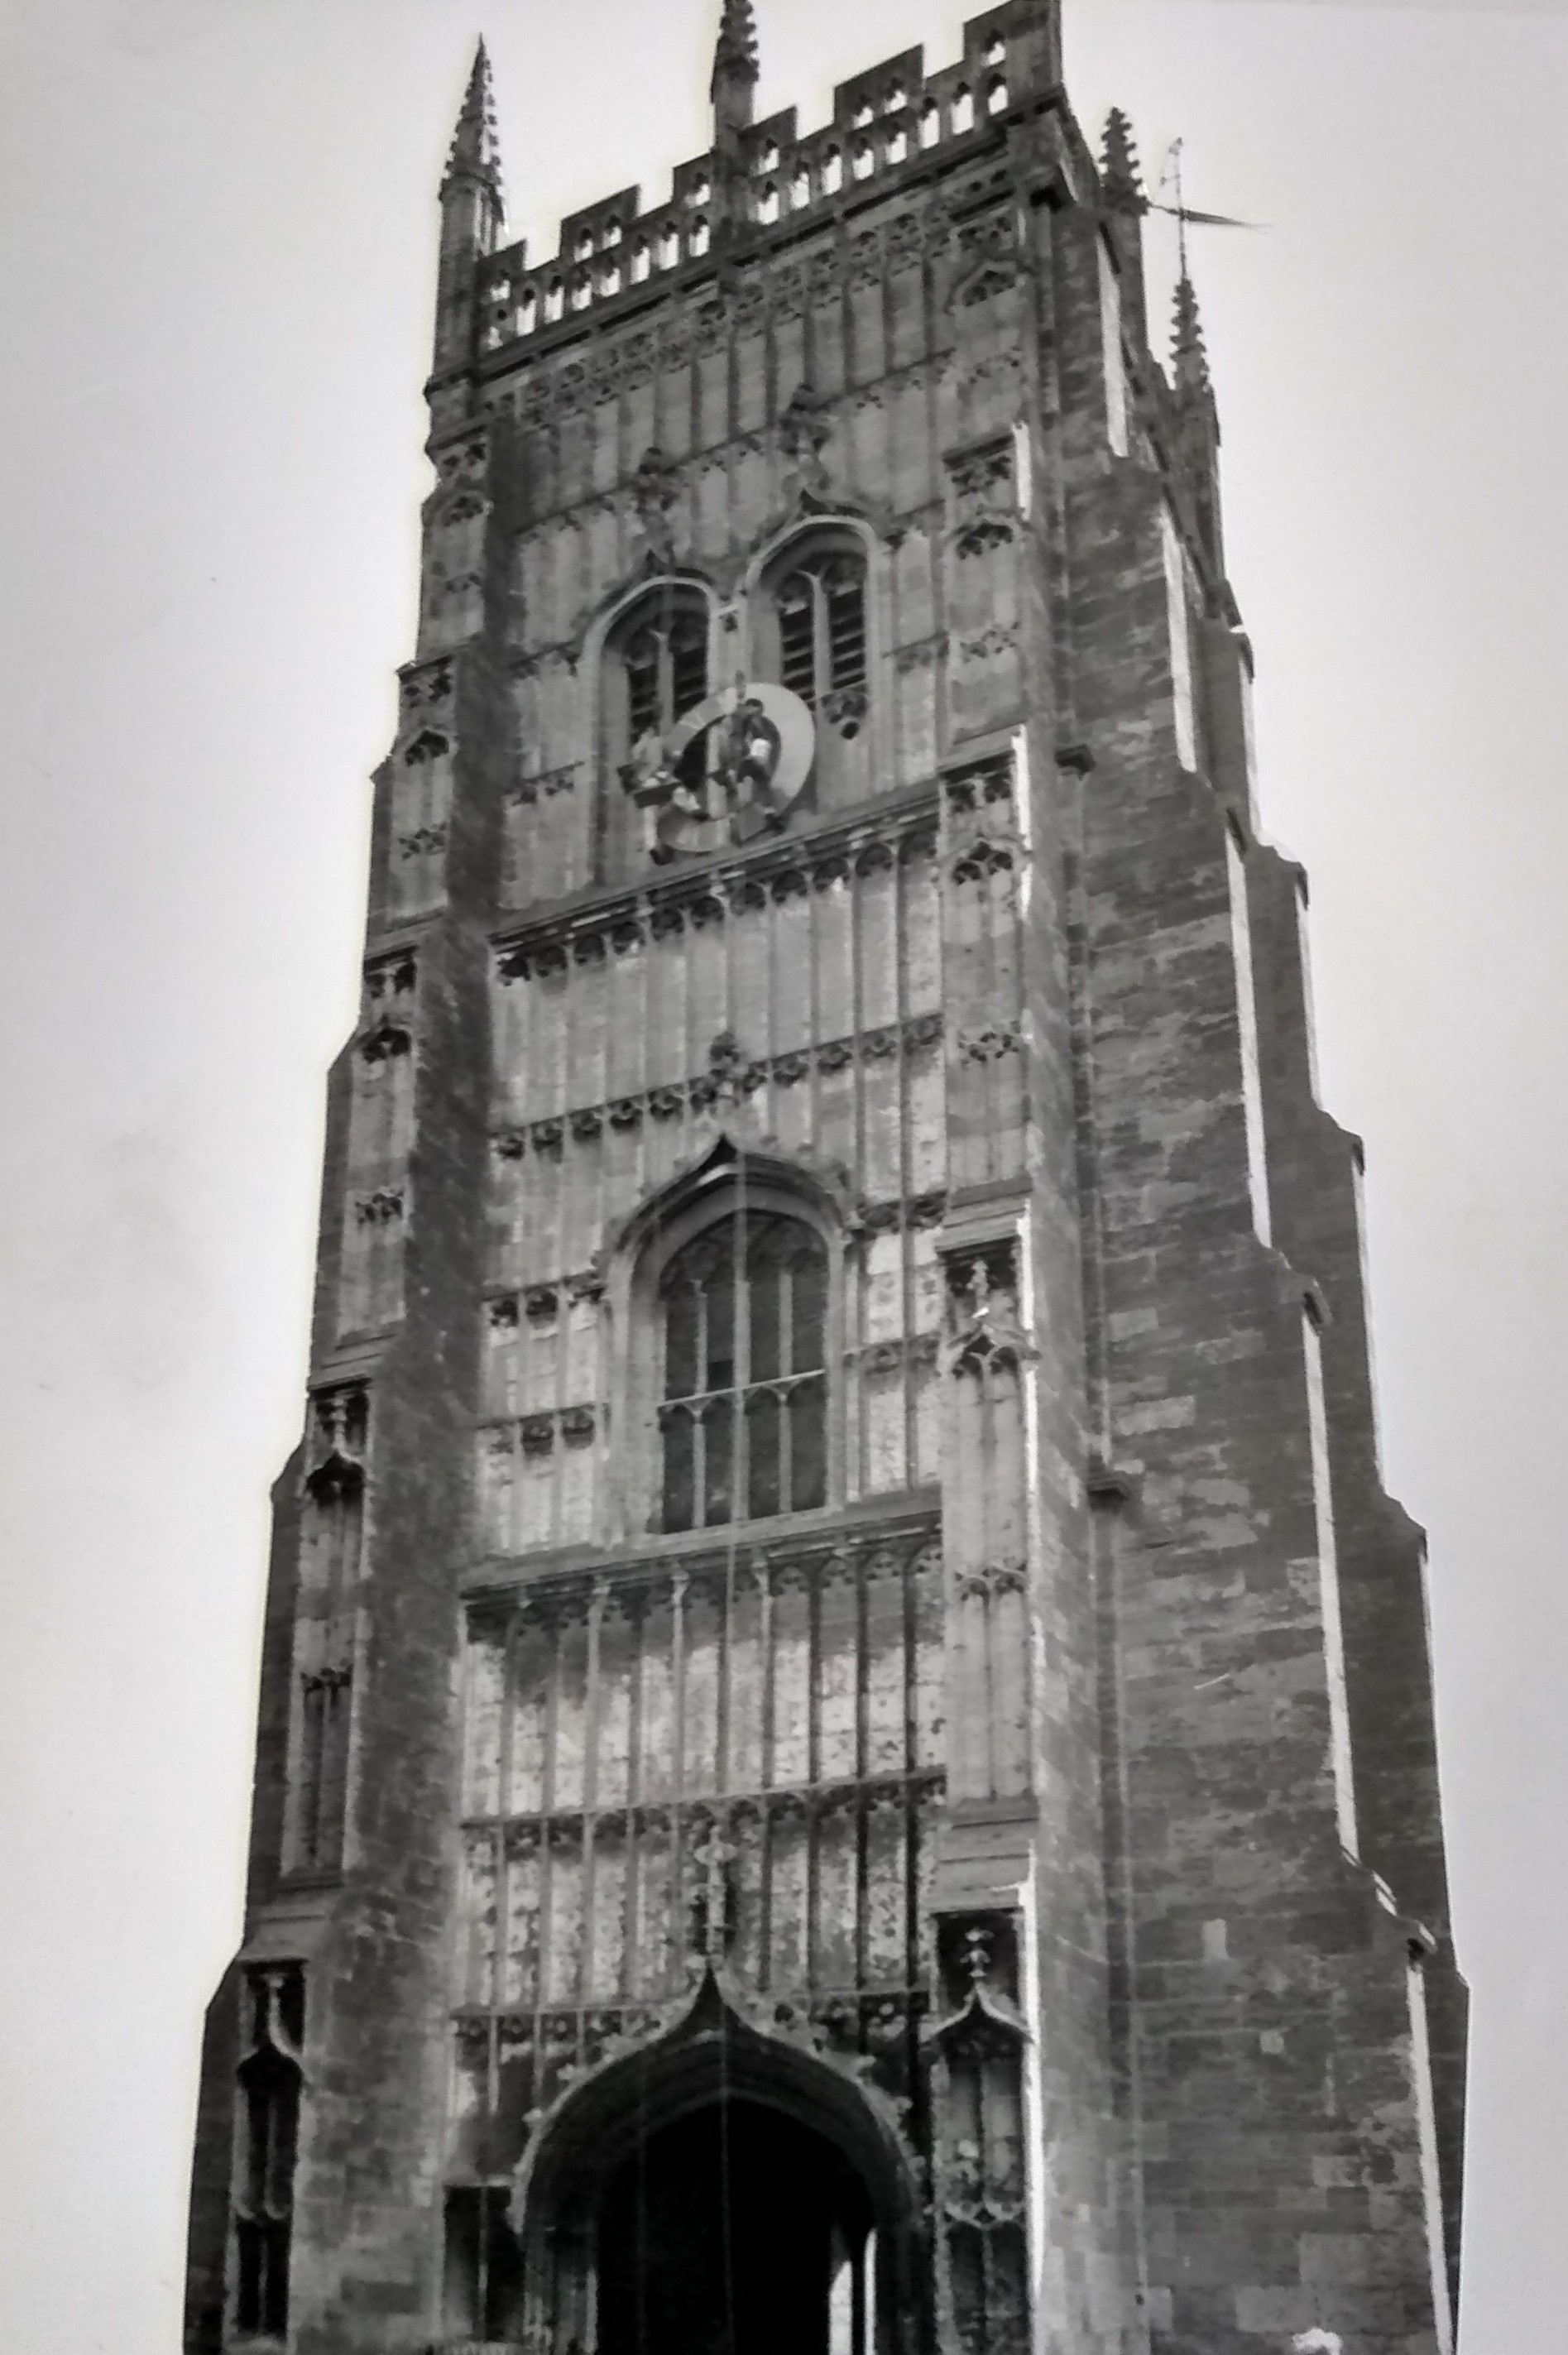 It’s August 1991 and restorers Chaz Morgan and George Edge called time on the Evesham Bell Tower clock while they carried out repairs